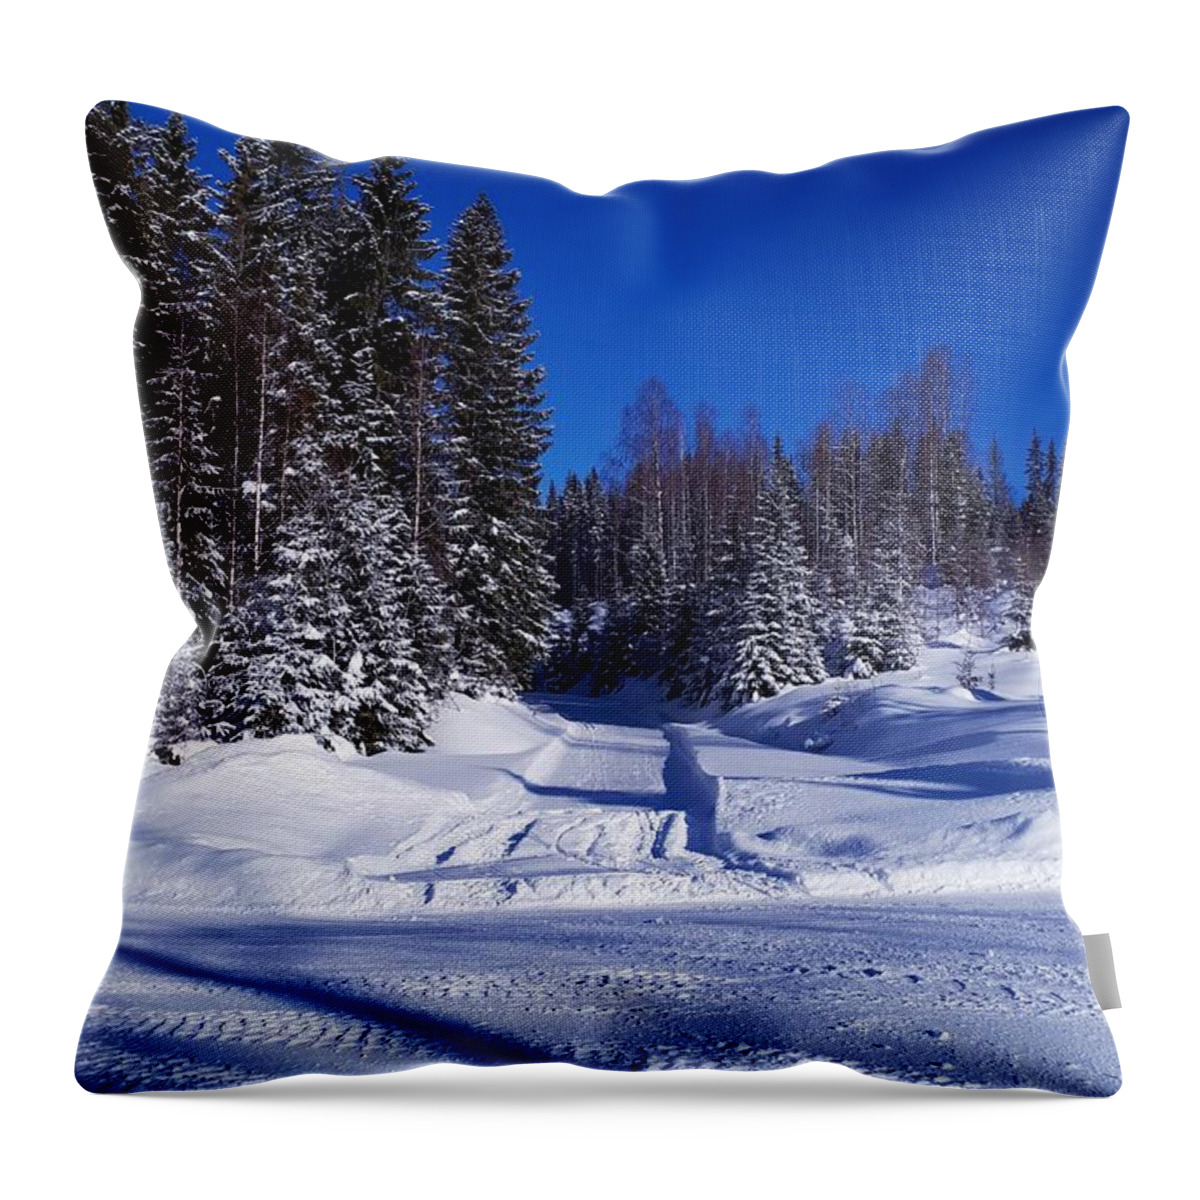 Winter Landscape Countryside Norway Scandinavia Europe Outdoors Nature Landscape Trees View Forrest Woods Countryside Snow Winter Countryroad Snow Blue Sky Trees White Green  Throw Pillow featuring the digital art Winter day by Jeanette Rode Dybdahl